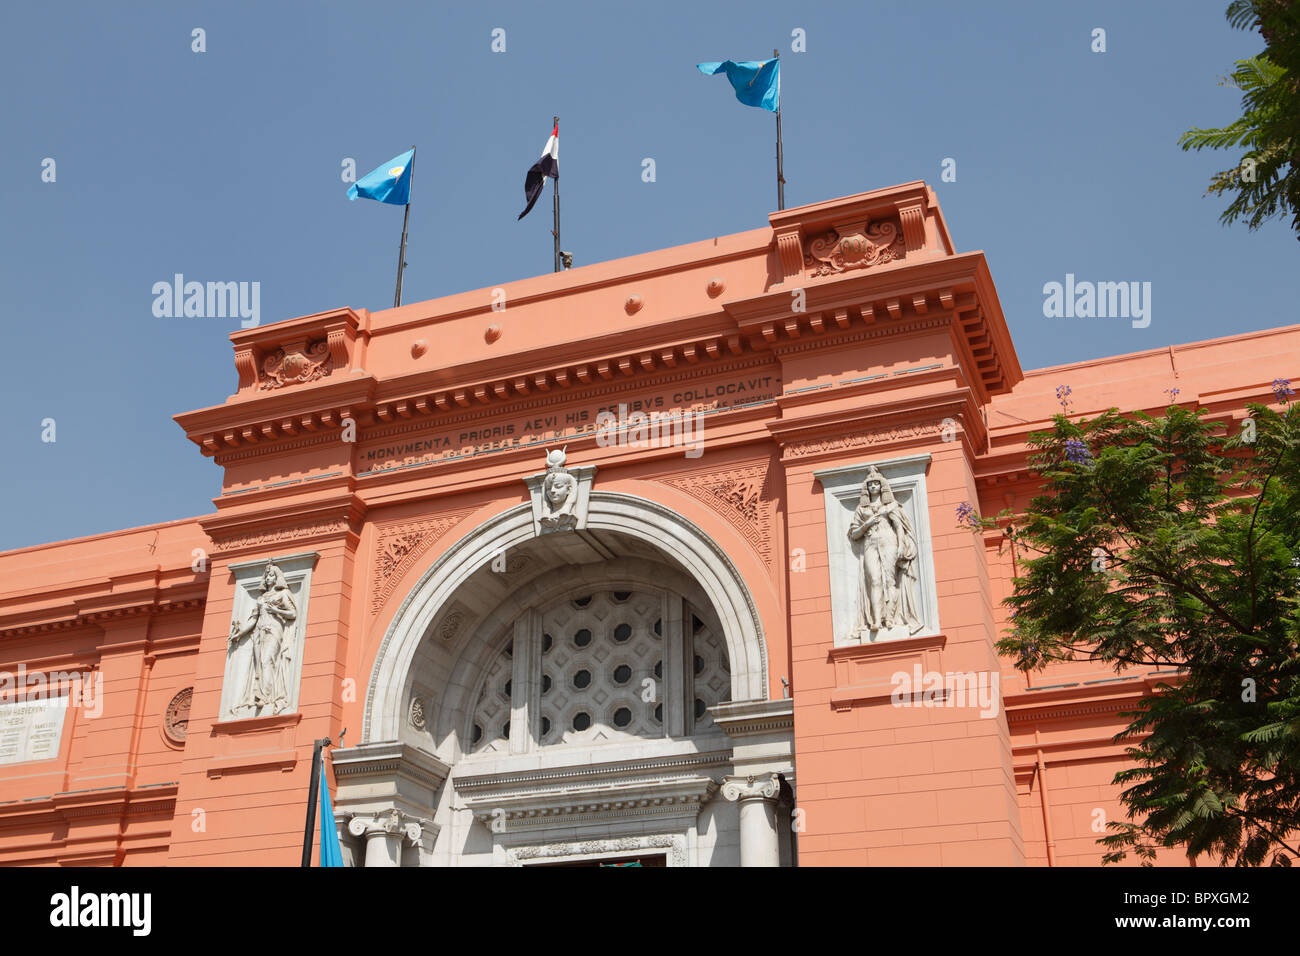 Entrance to the Egyptian Museum - Cairo, Egypt. Stock Photo